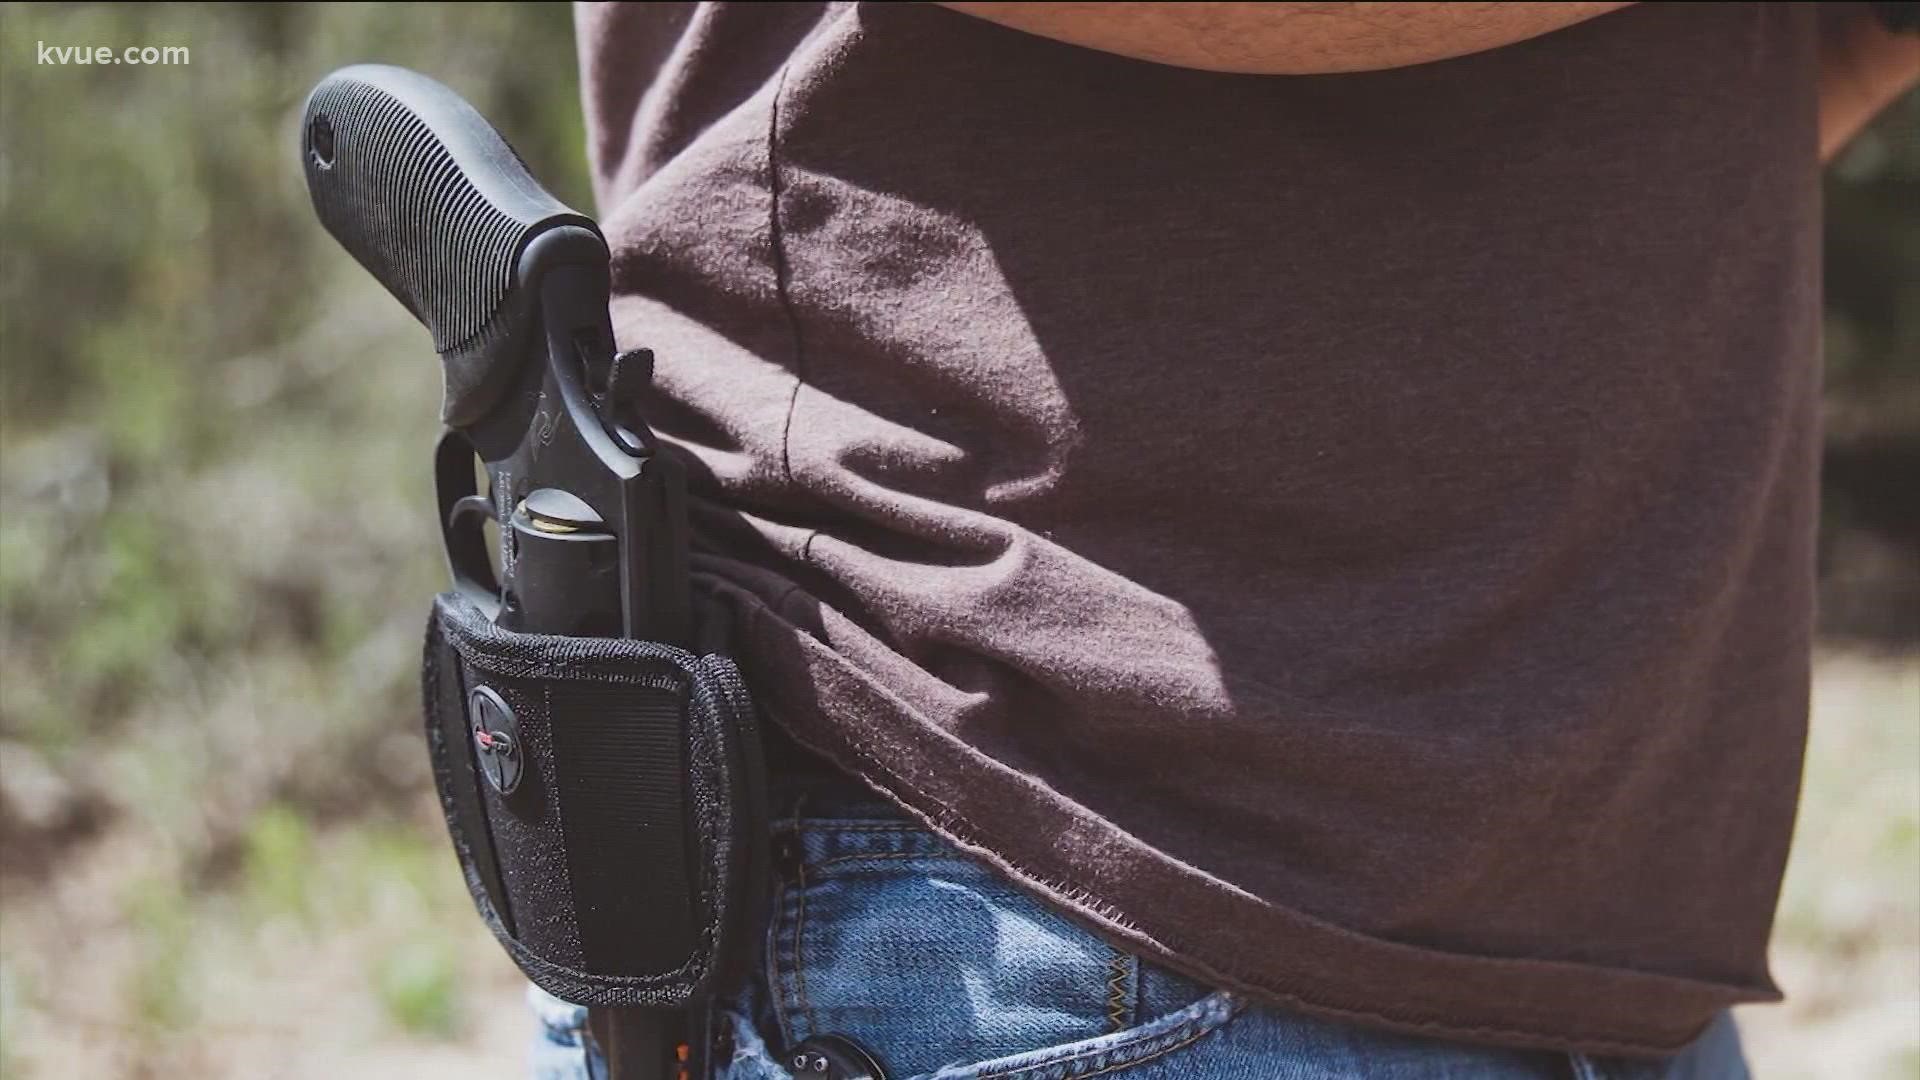 House Bill 1927 allows Texans 21 and older to openly carry handguns without a license or training. It is one of 666 new laws that went into effect on Sept. 1.